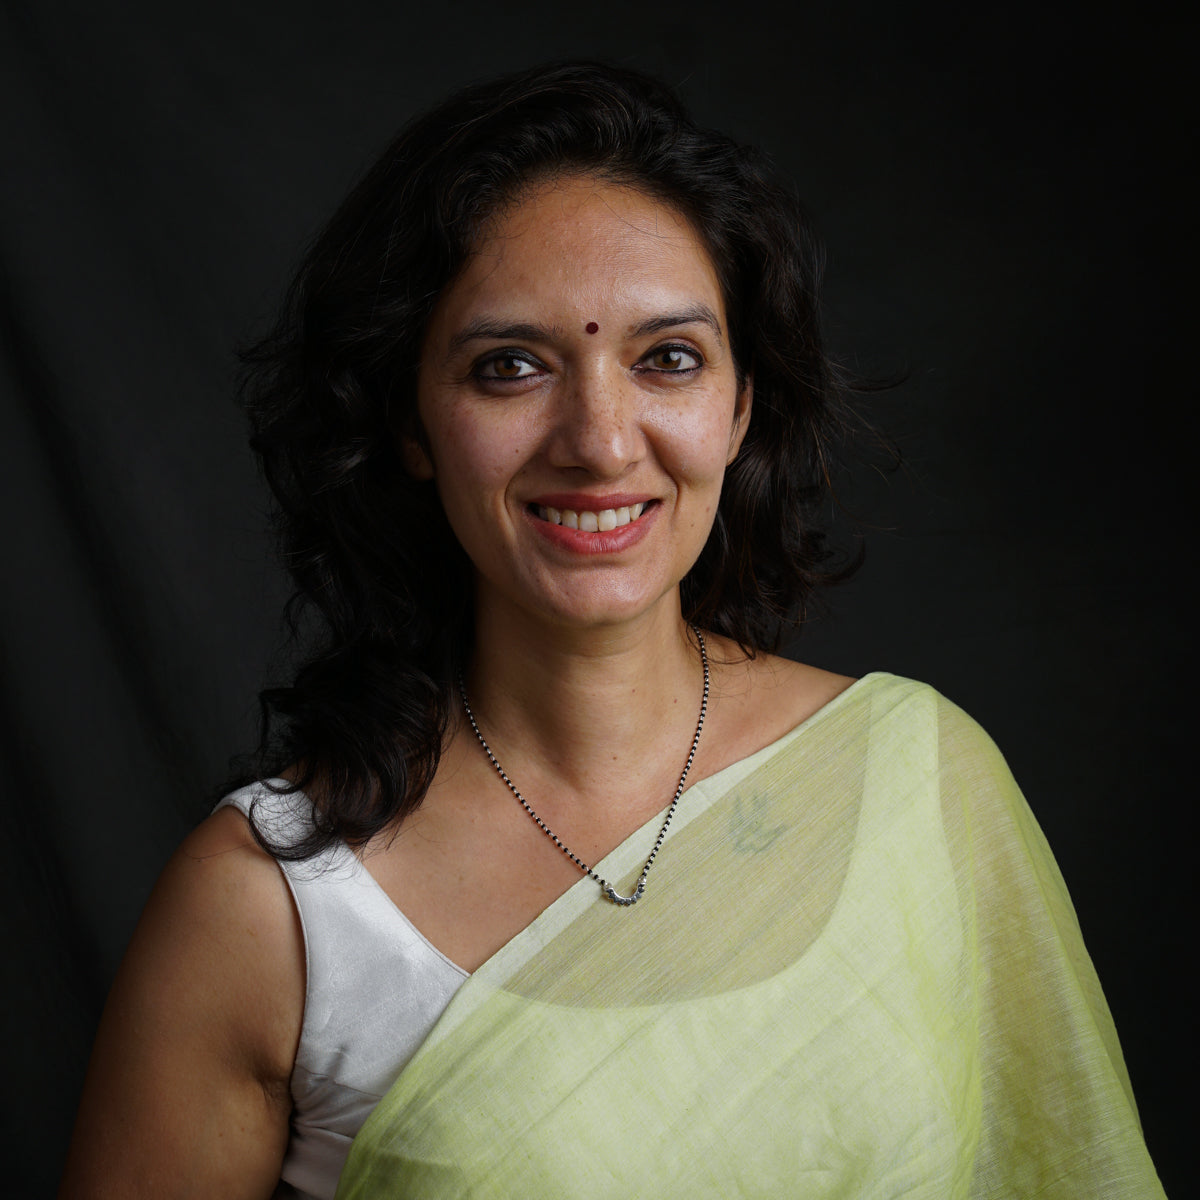 a woman in a green sari smiling for the camera